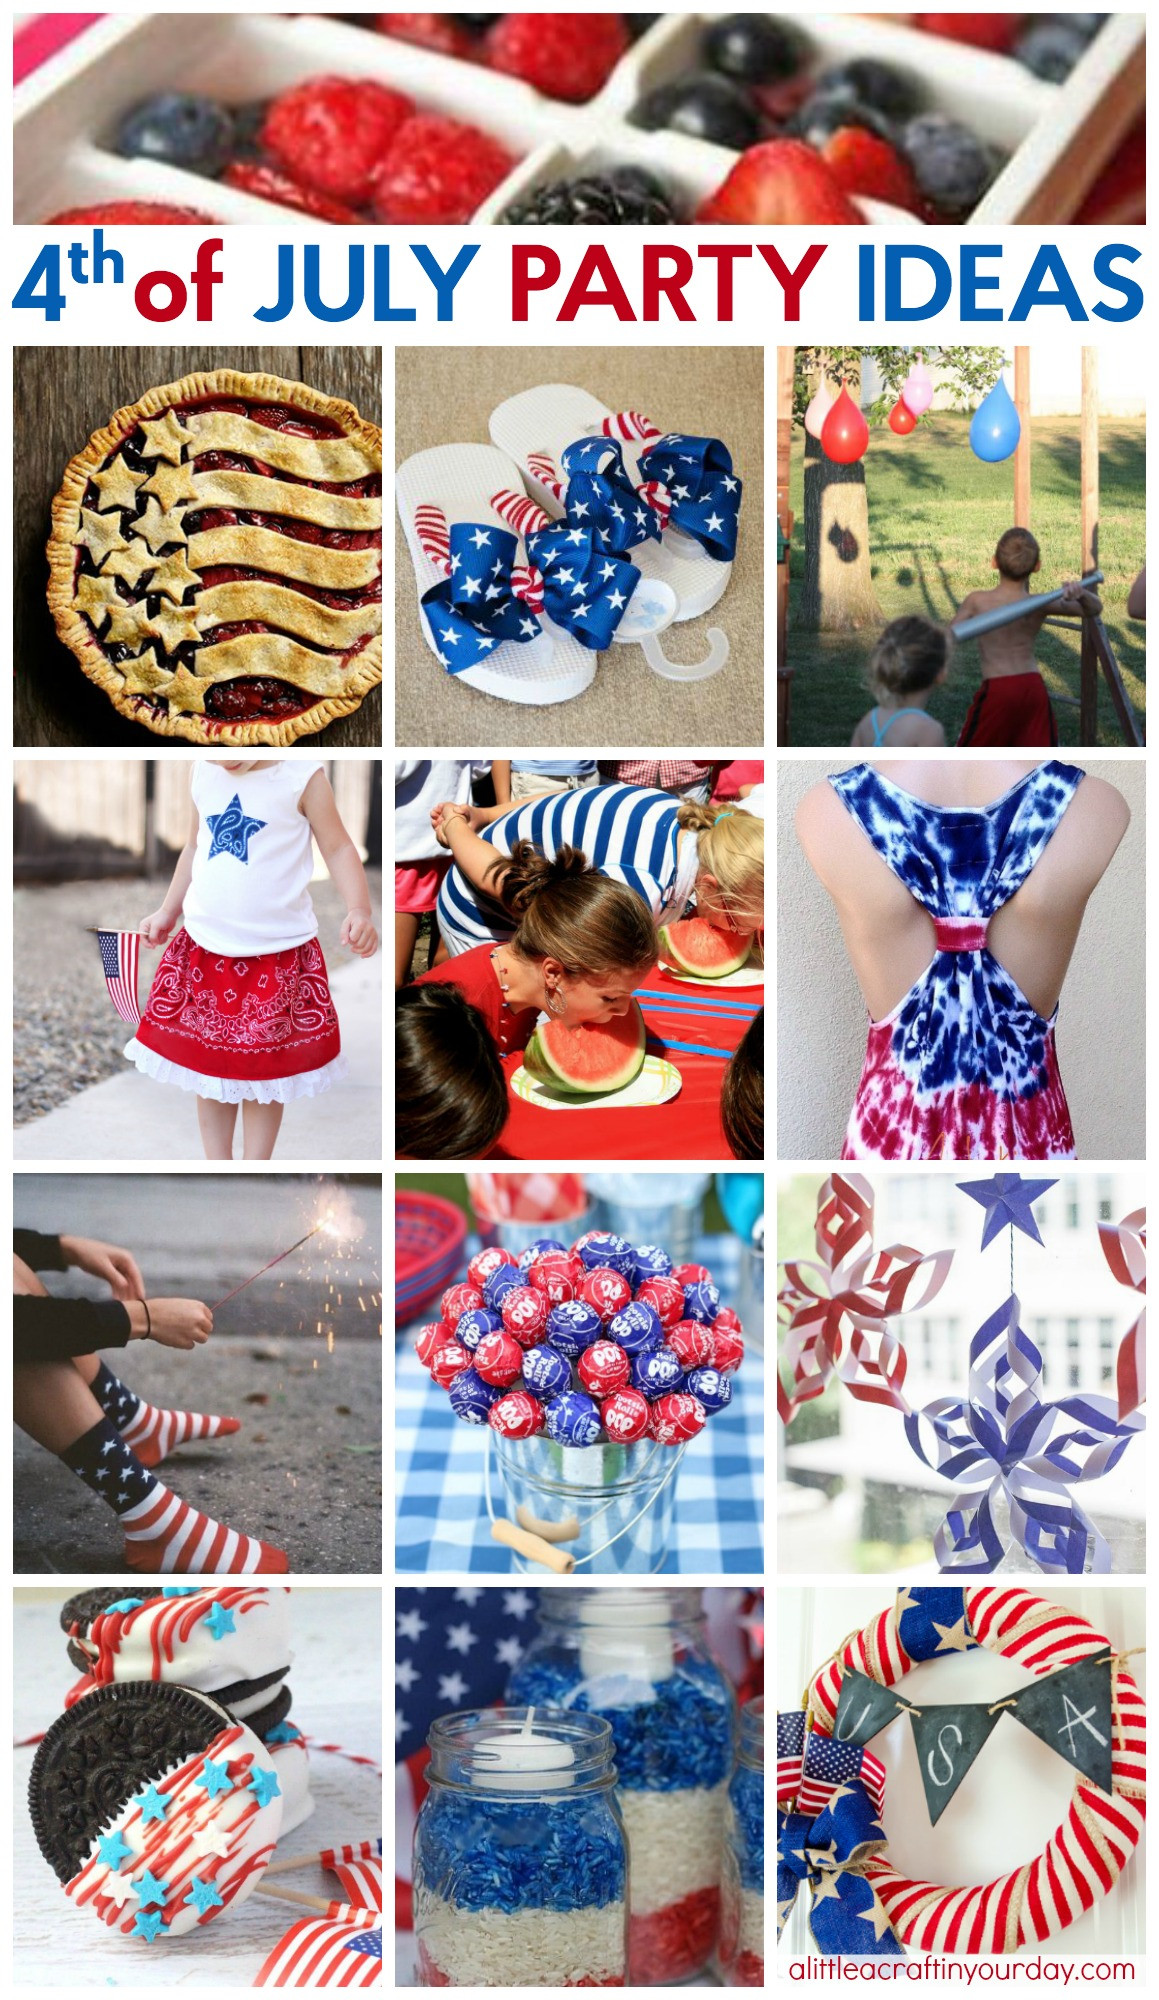 4th Of July Party Supplies
 44 Way Cool Fourth of July Party Ideas A Little Craft In